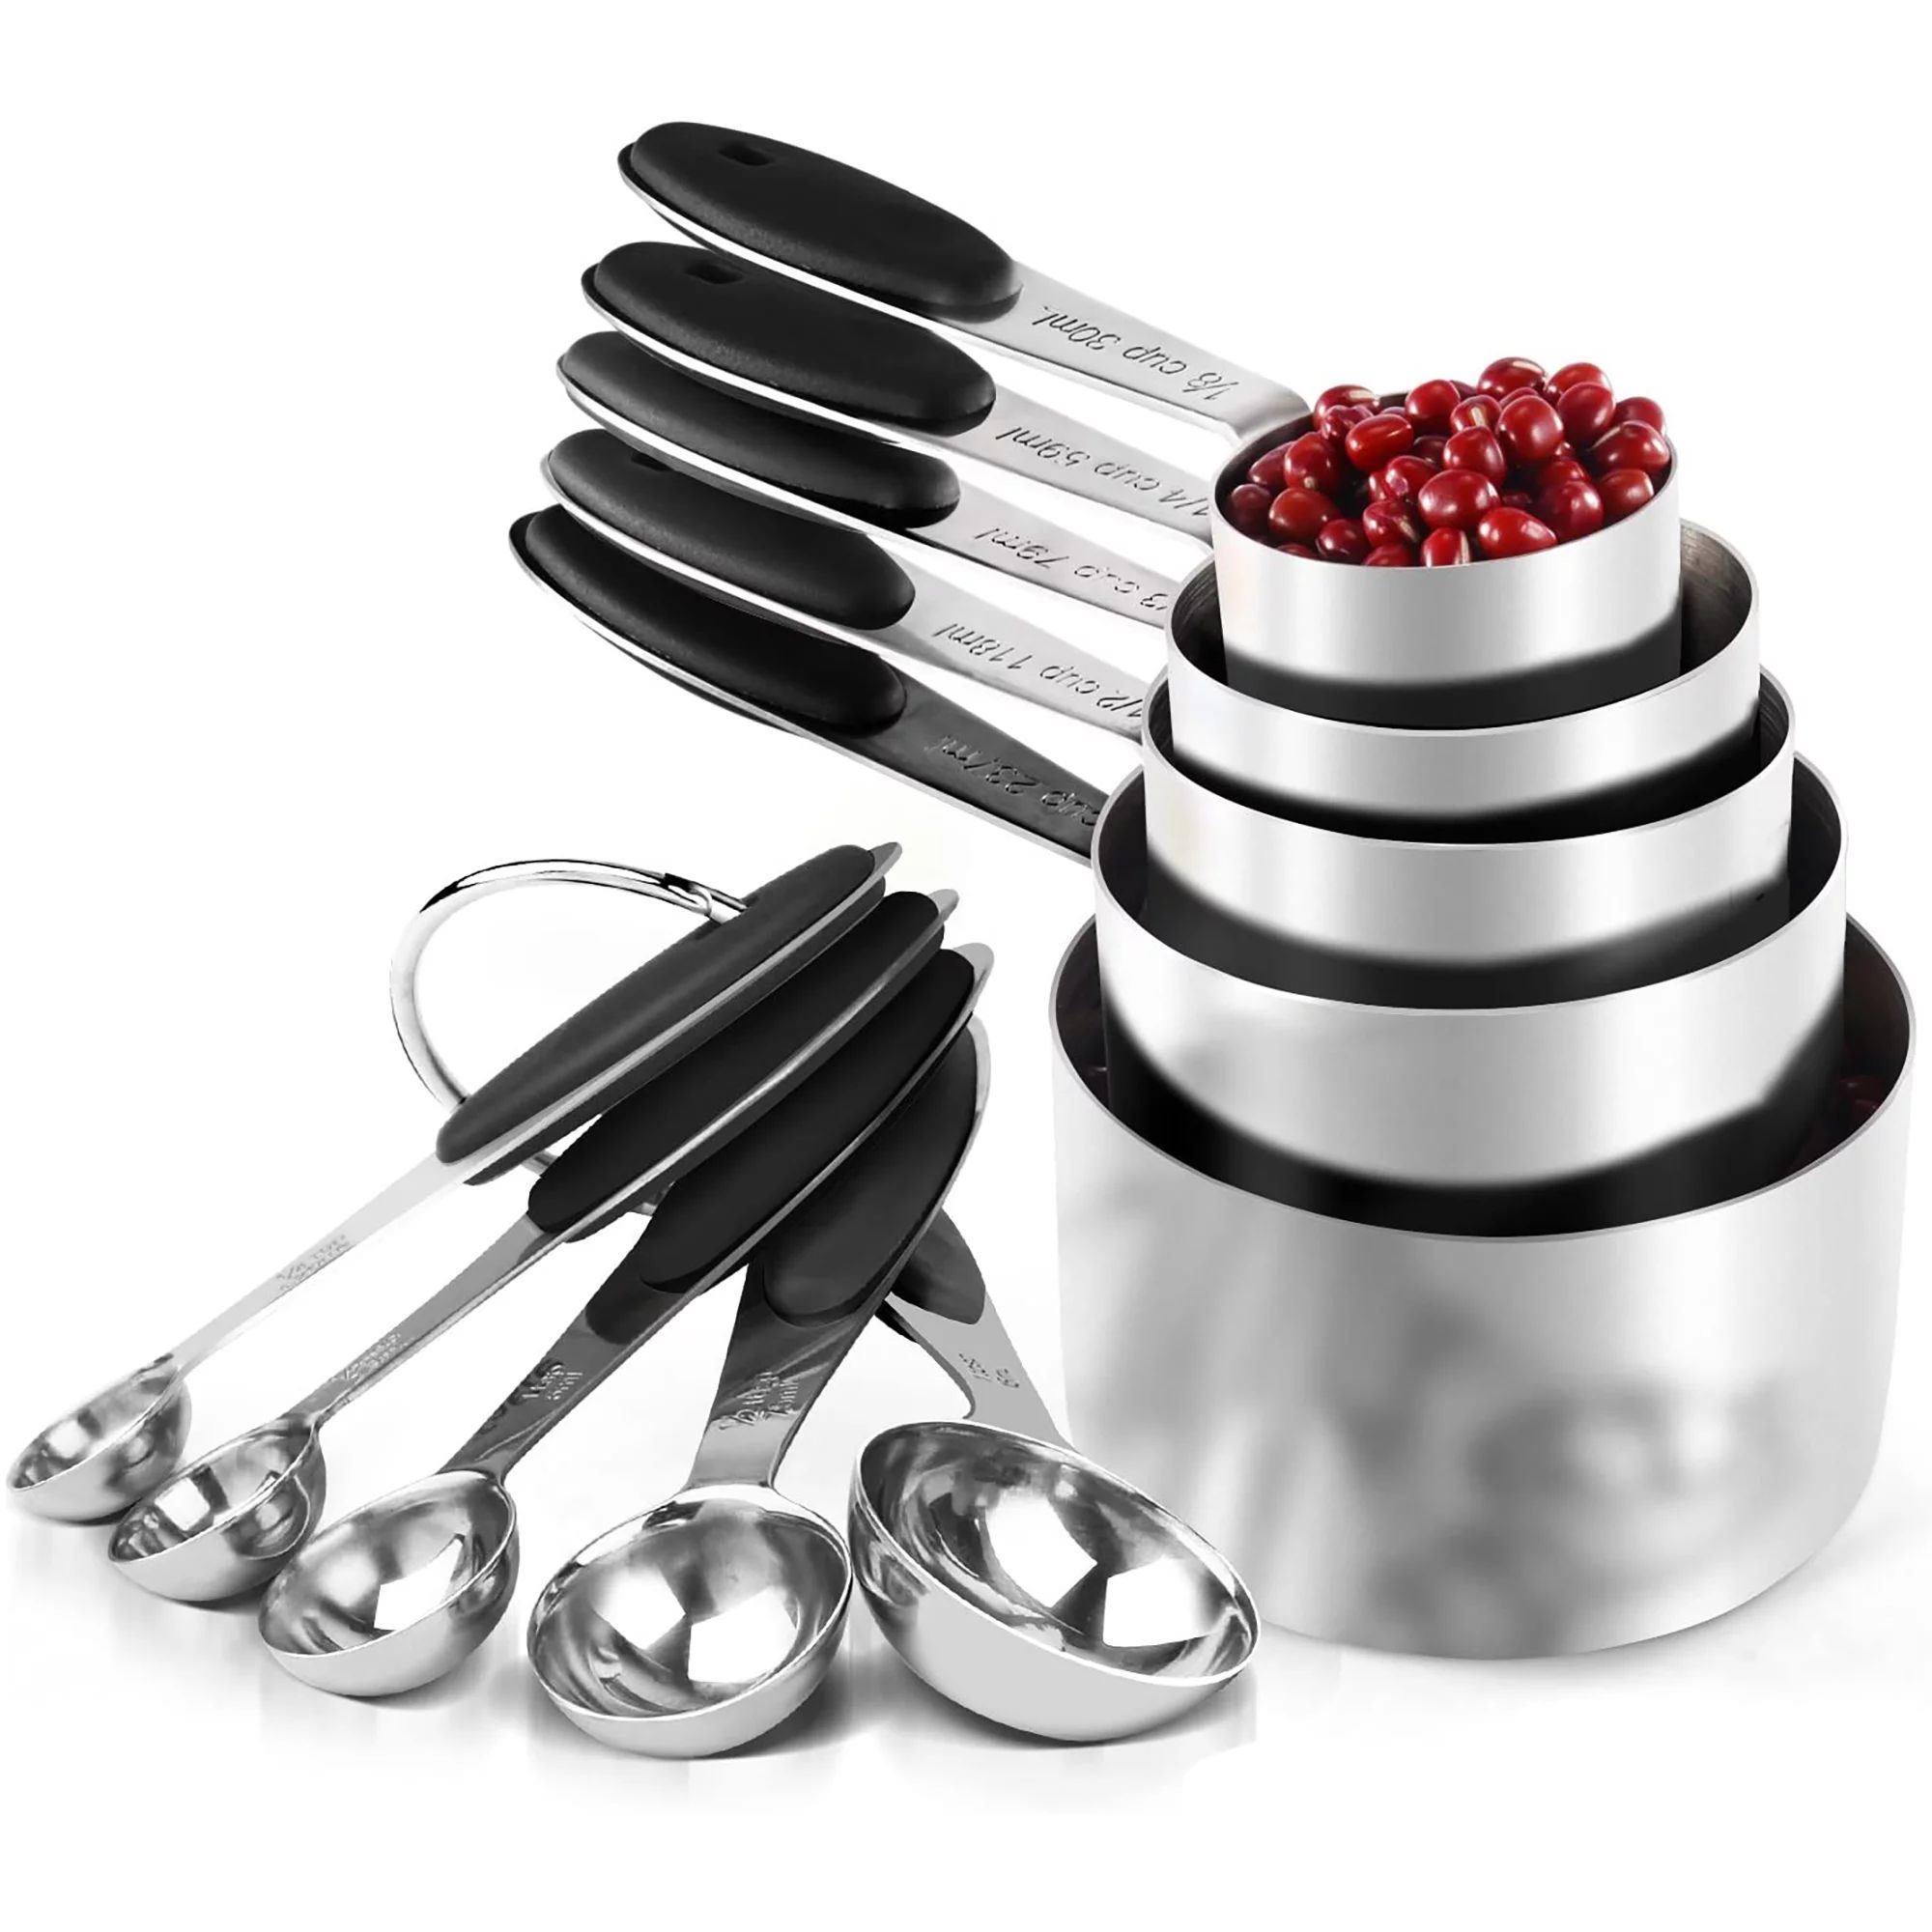 SYNGAR 10 Piece Measuring Cups and Measuring Spoon Set, Stainless Steel with Soft Touch Silicone ... | Walmart (US)